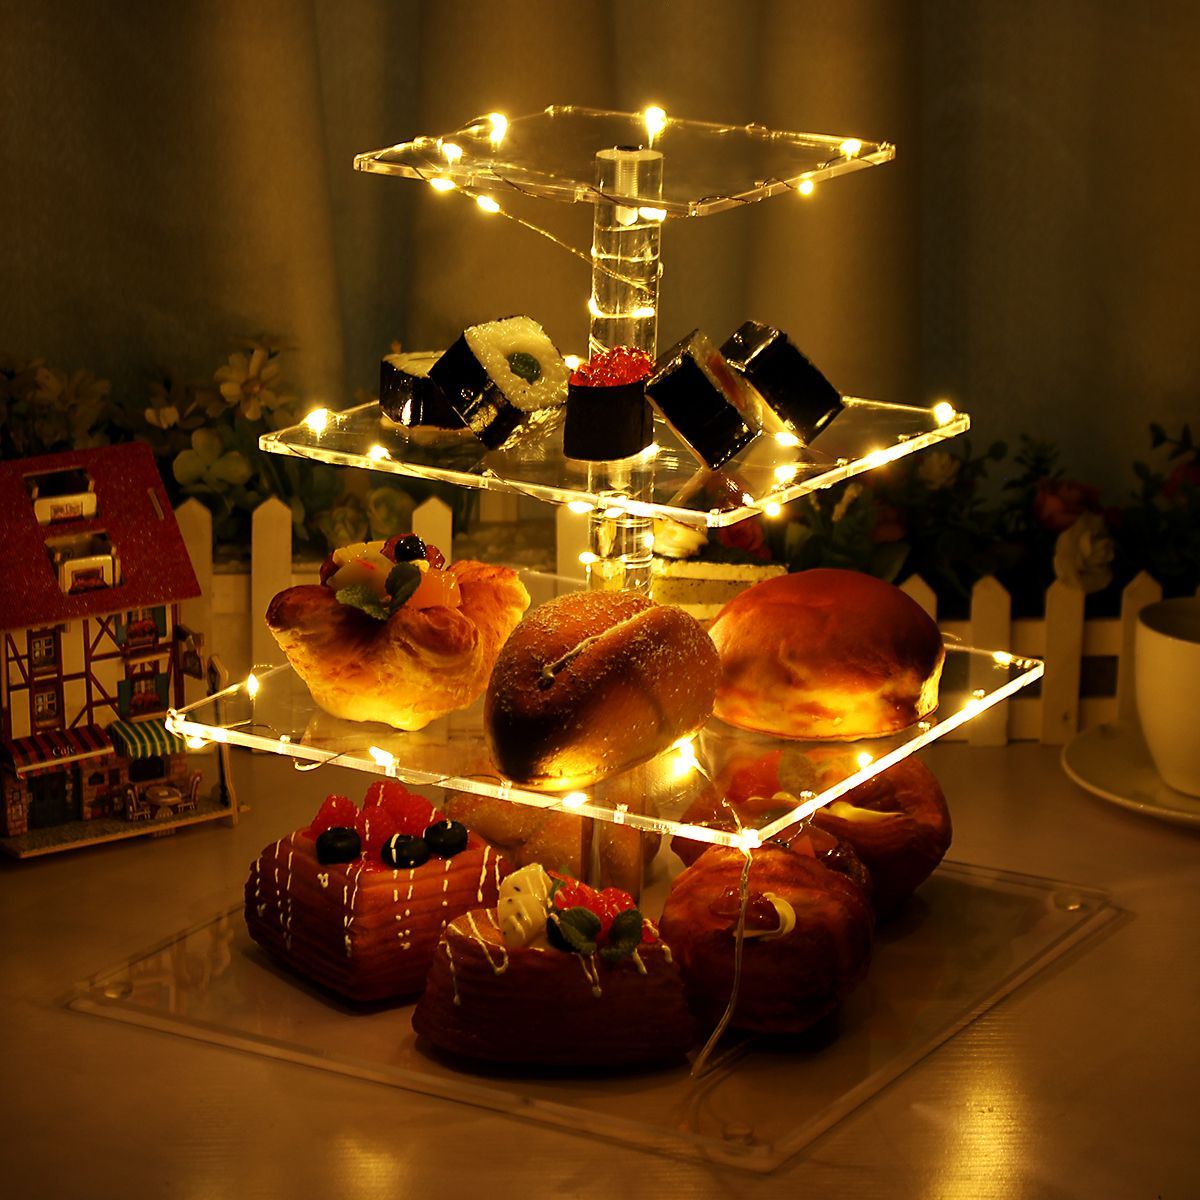 4-Layer-Cake-Cup-Stand-Tray-Wedding-Party-Cupcake-Display-Holder-LED-String-Light-1591019